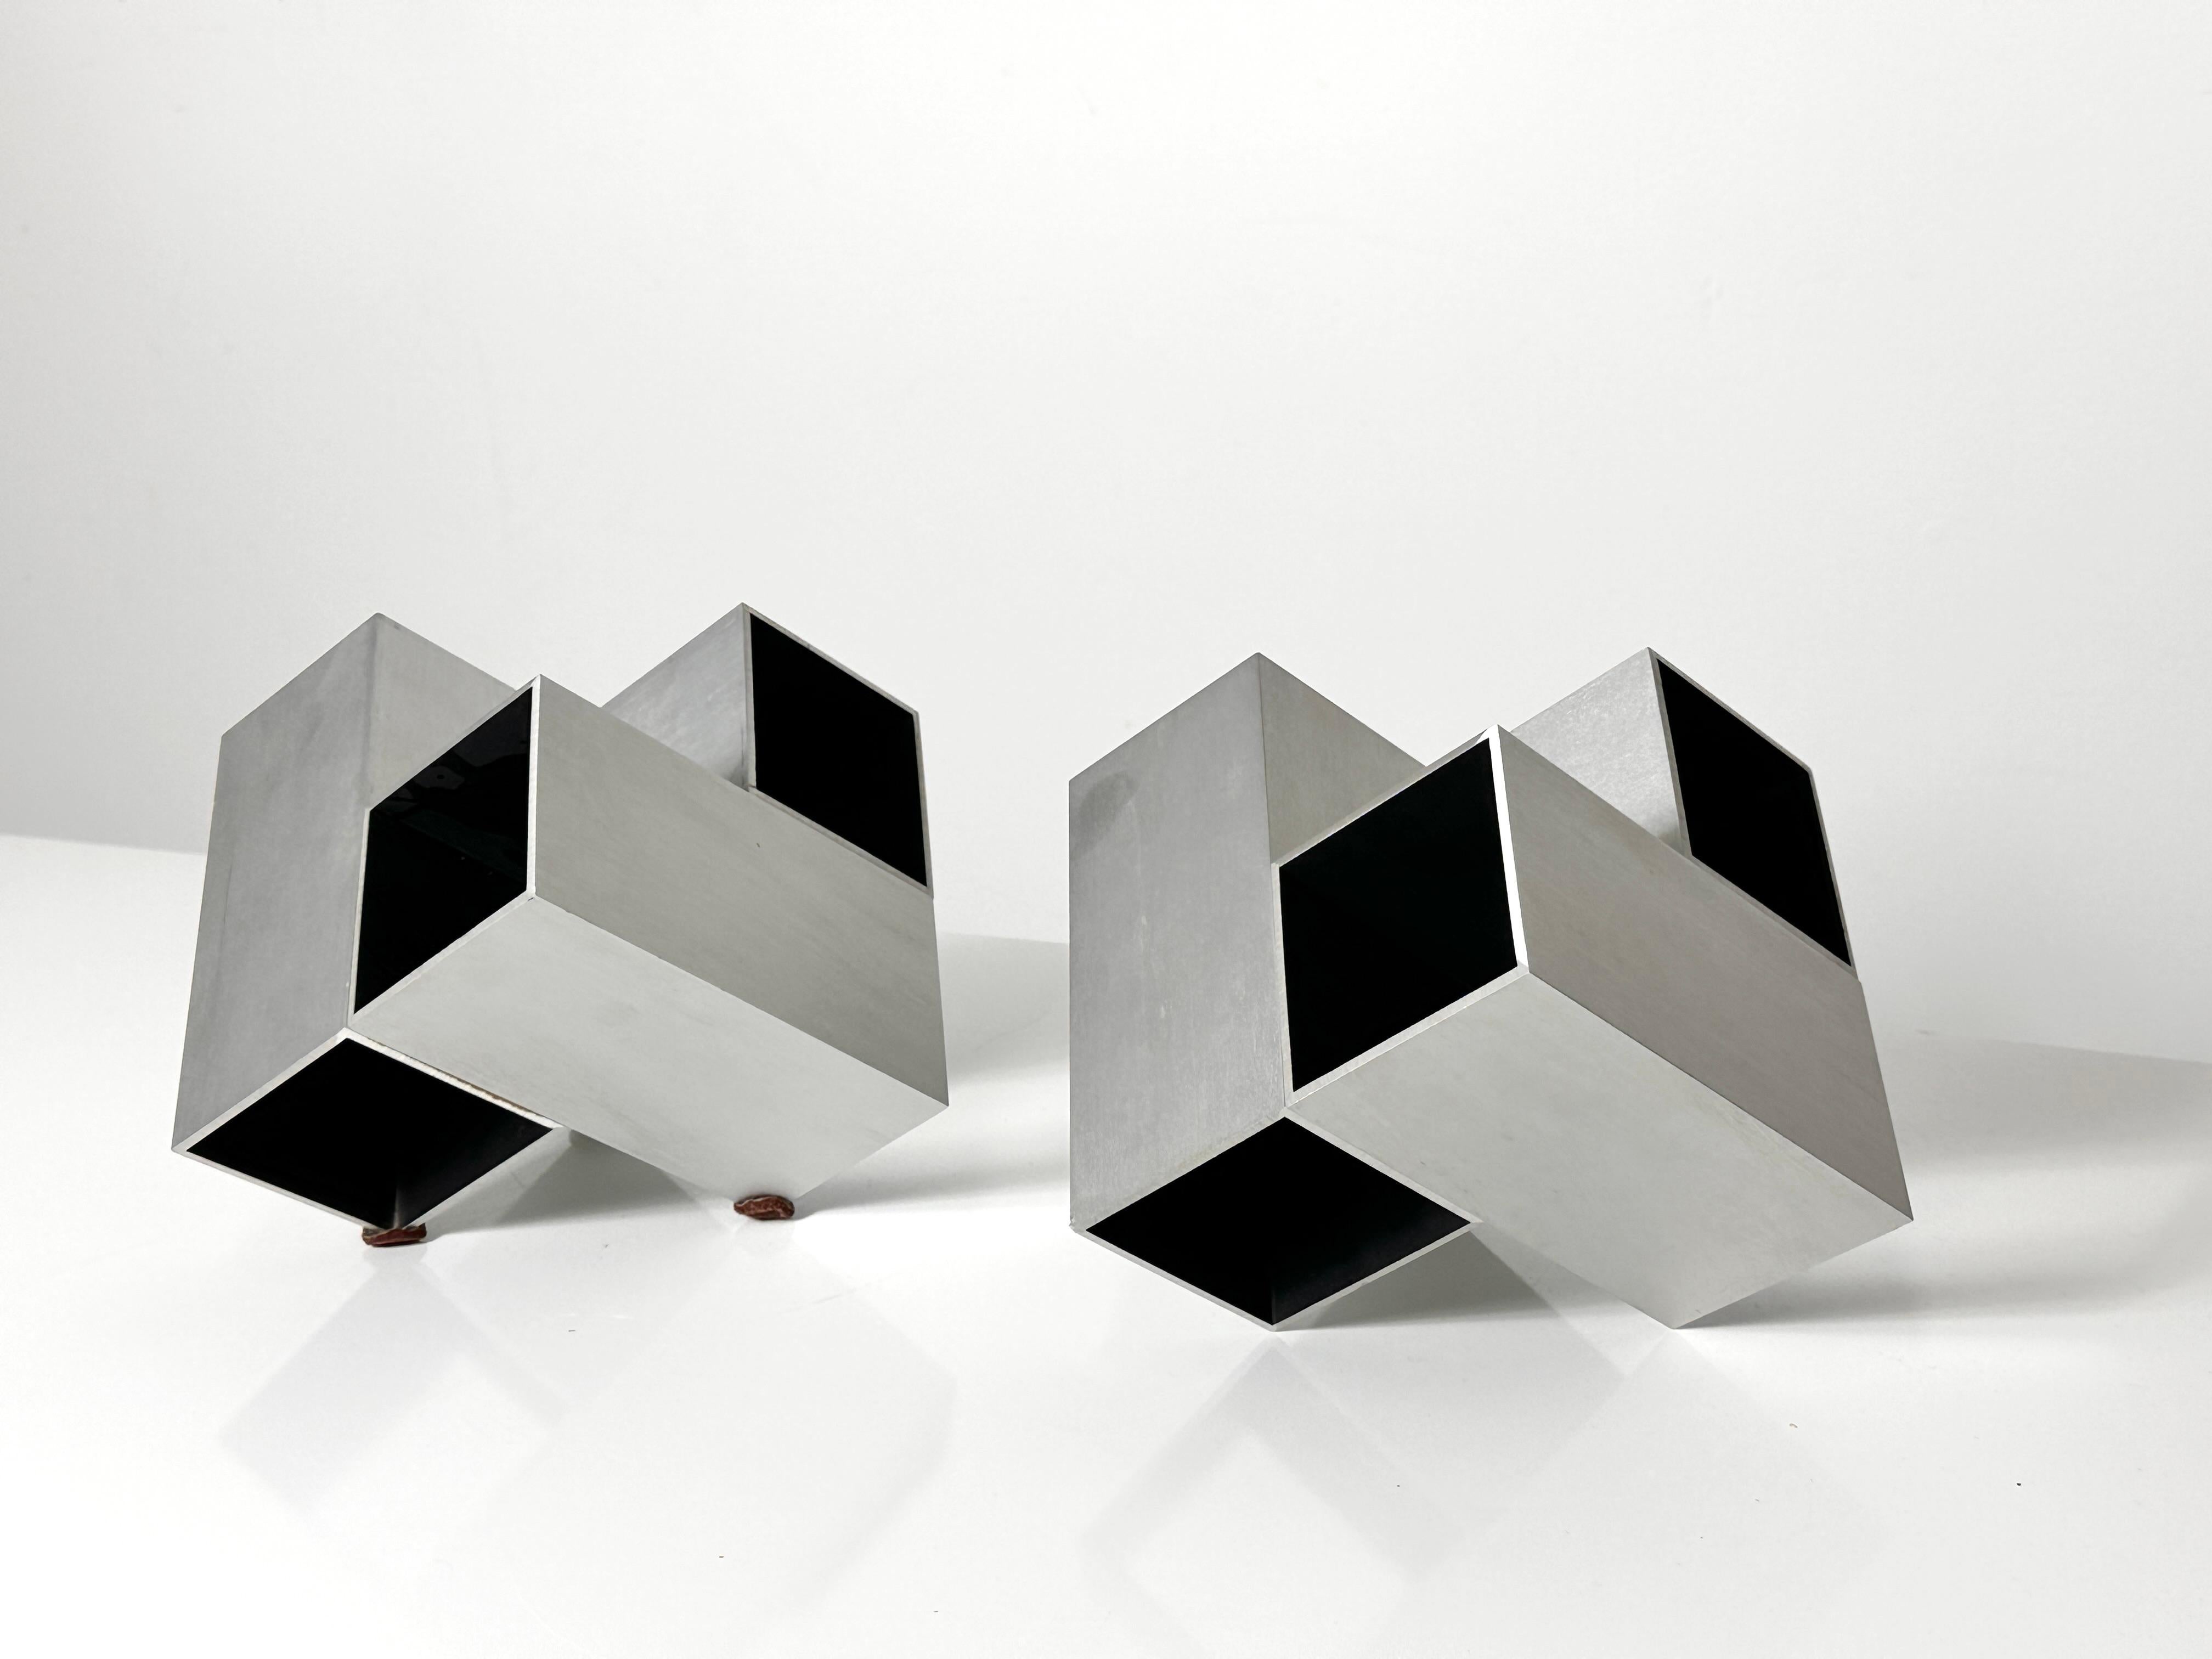 Late 20th Century Abstract Modern Modular Aluminum Op Art Cube Sculpture by Kosso Eloul 1970s For Sale